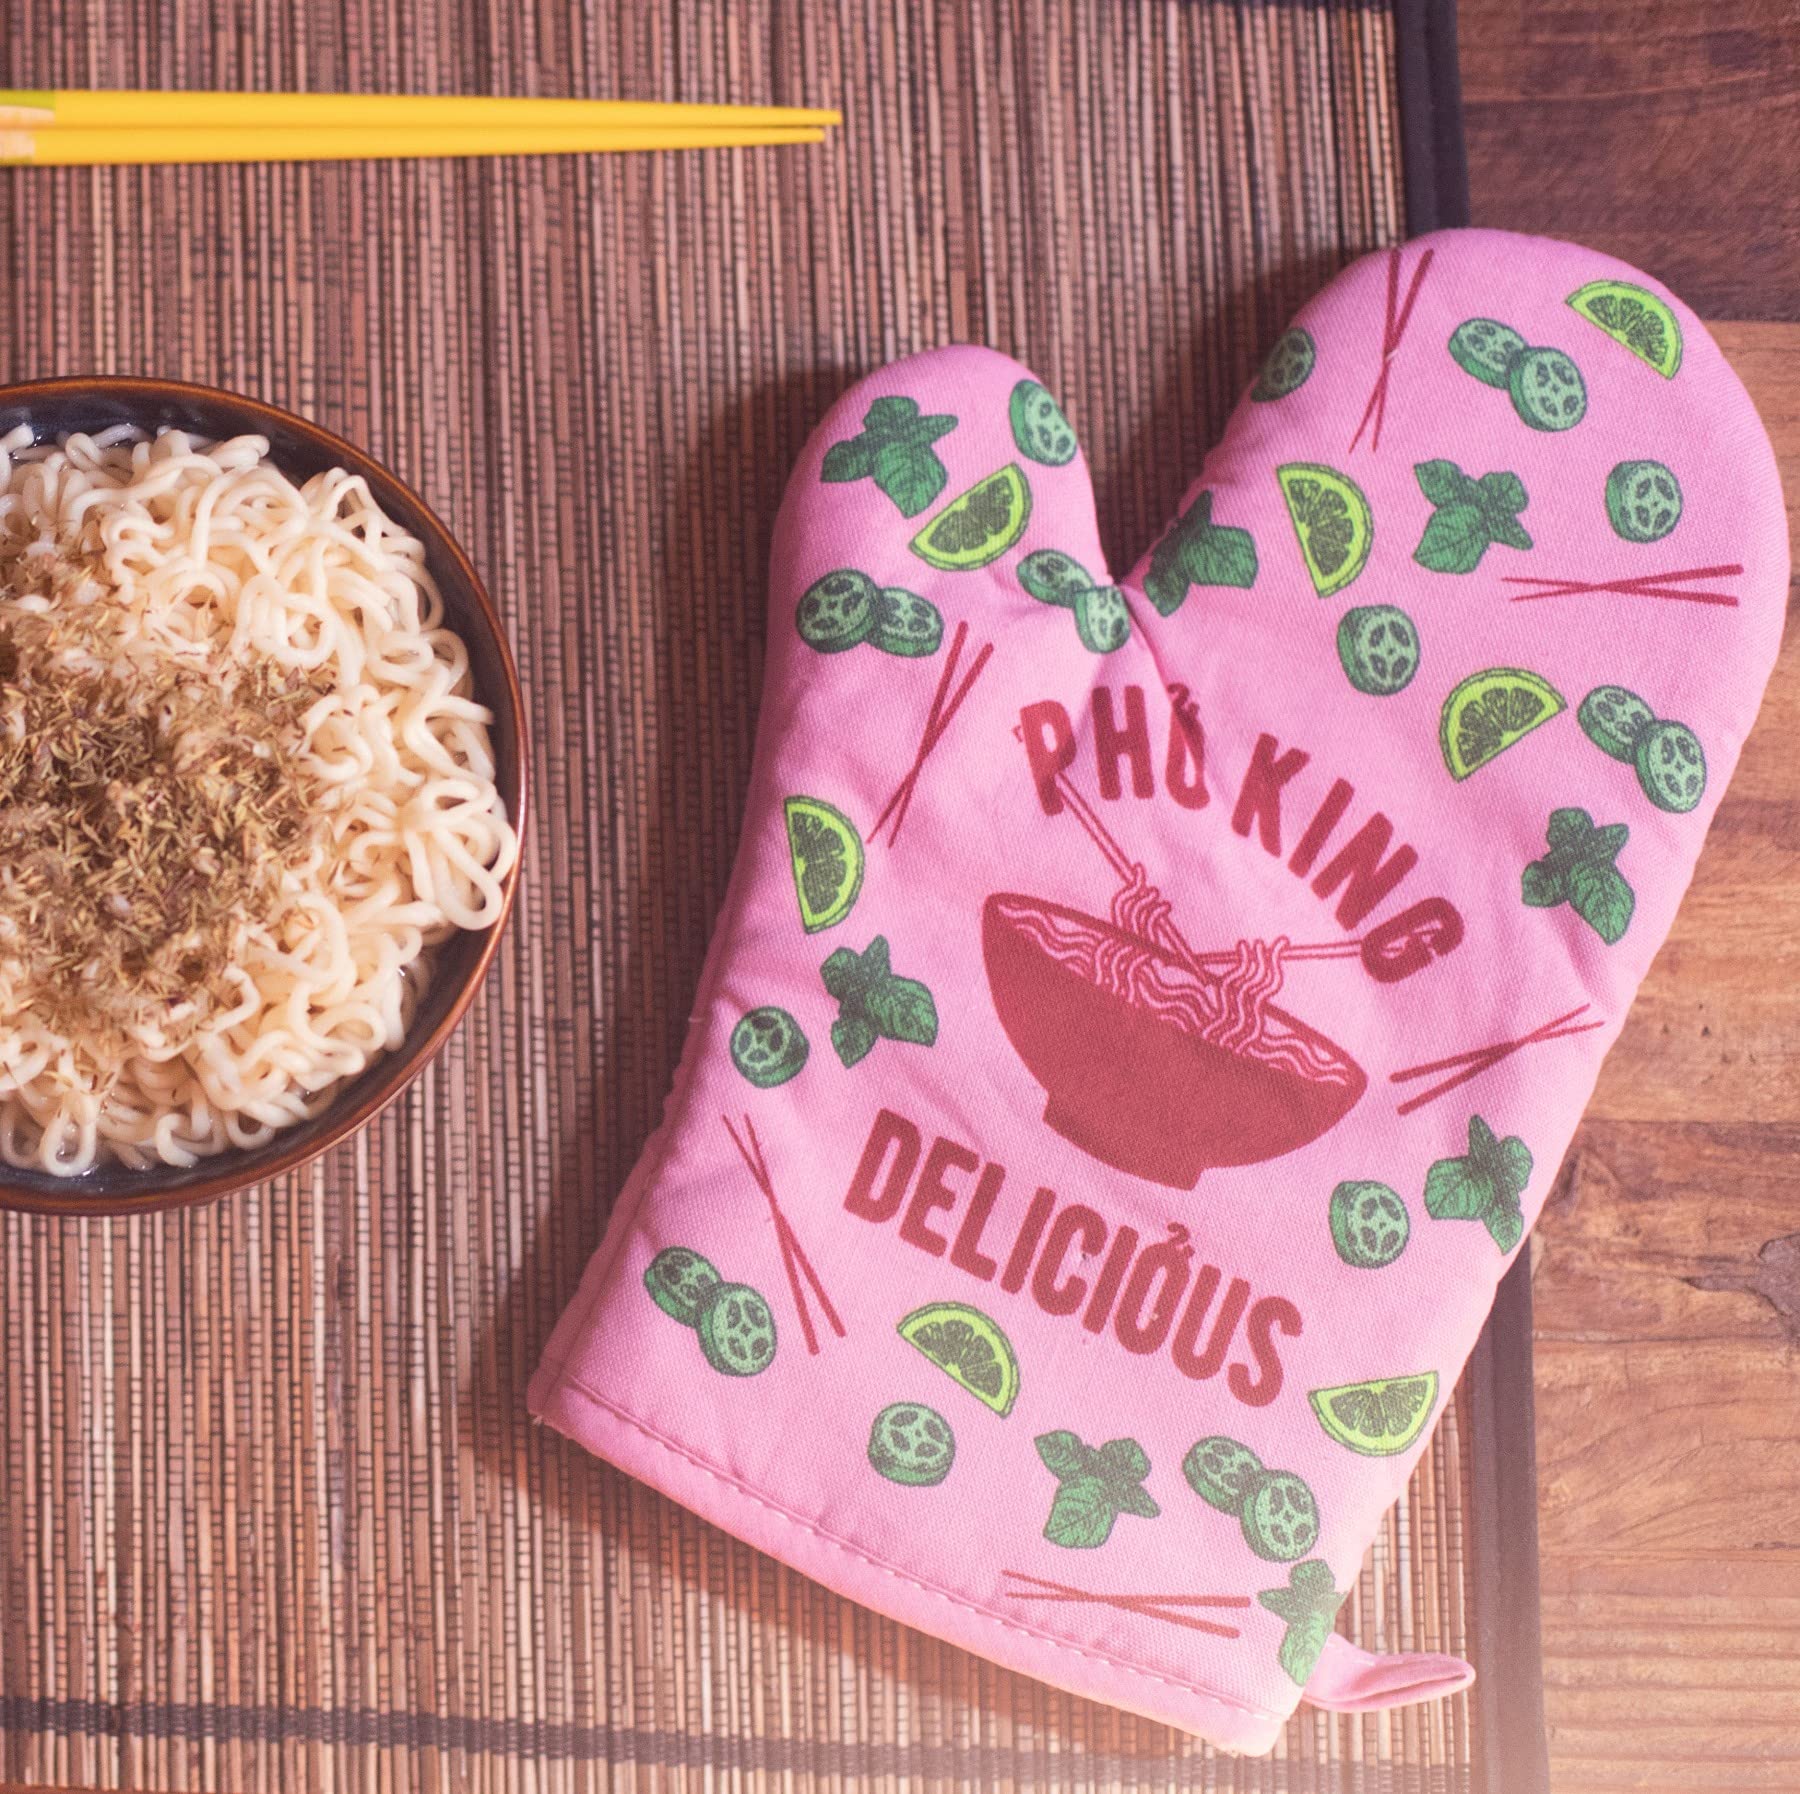 Pho King Delicious Oven Mitt Funny Vietnamese Soup F*cking Delicious Graphic Novelty Kitchen Glove Funny Graphic Kitchenwear Funny Food Novelty Cookware Pink Oven Mitt